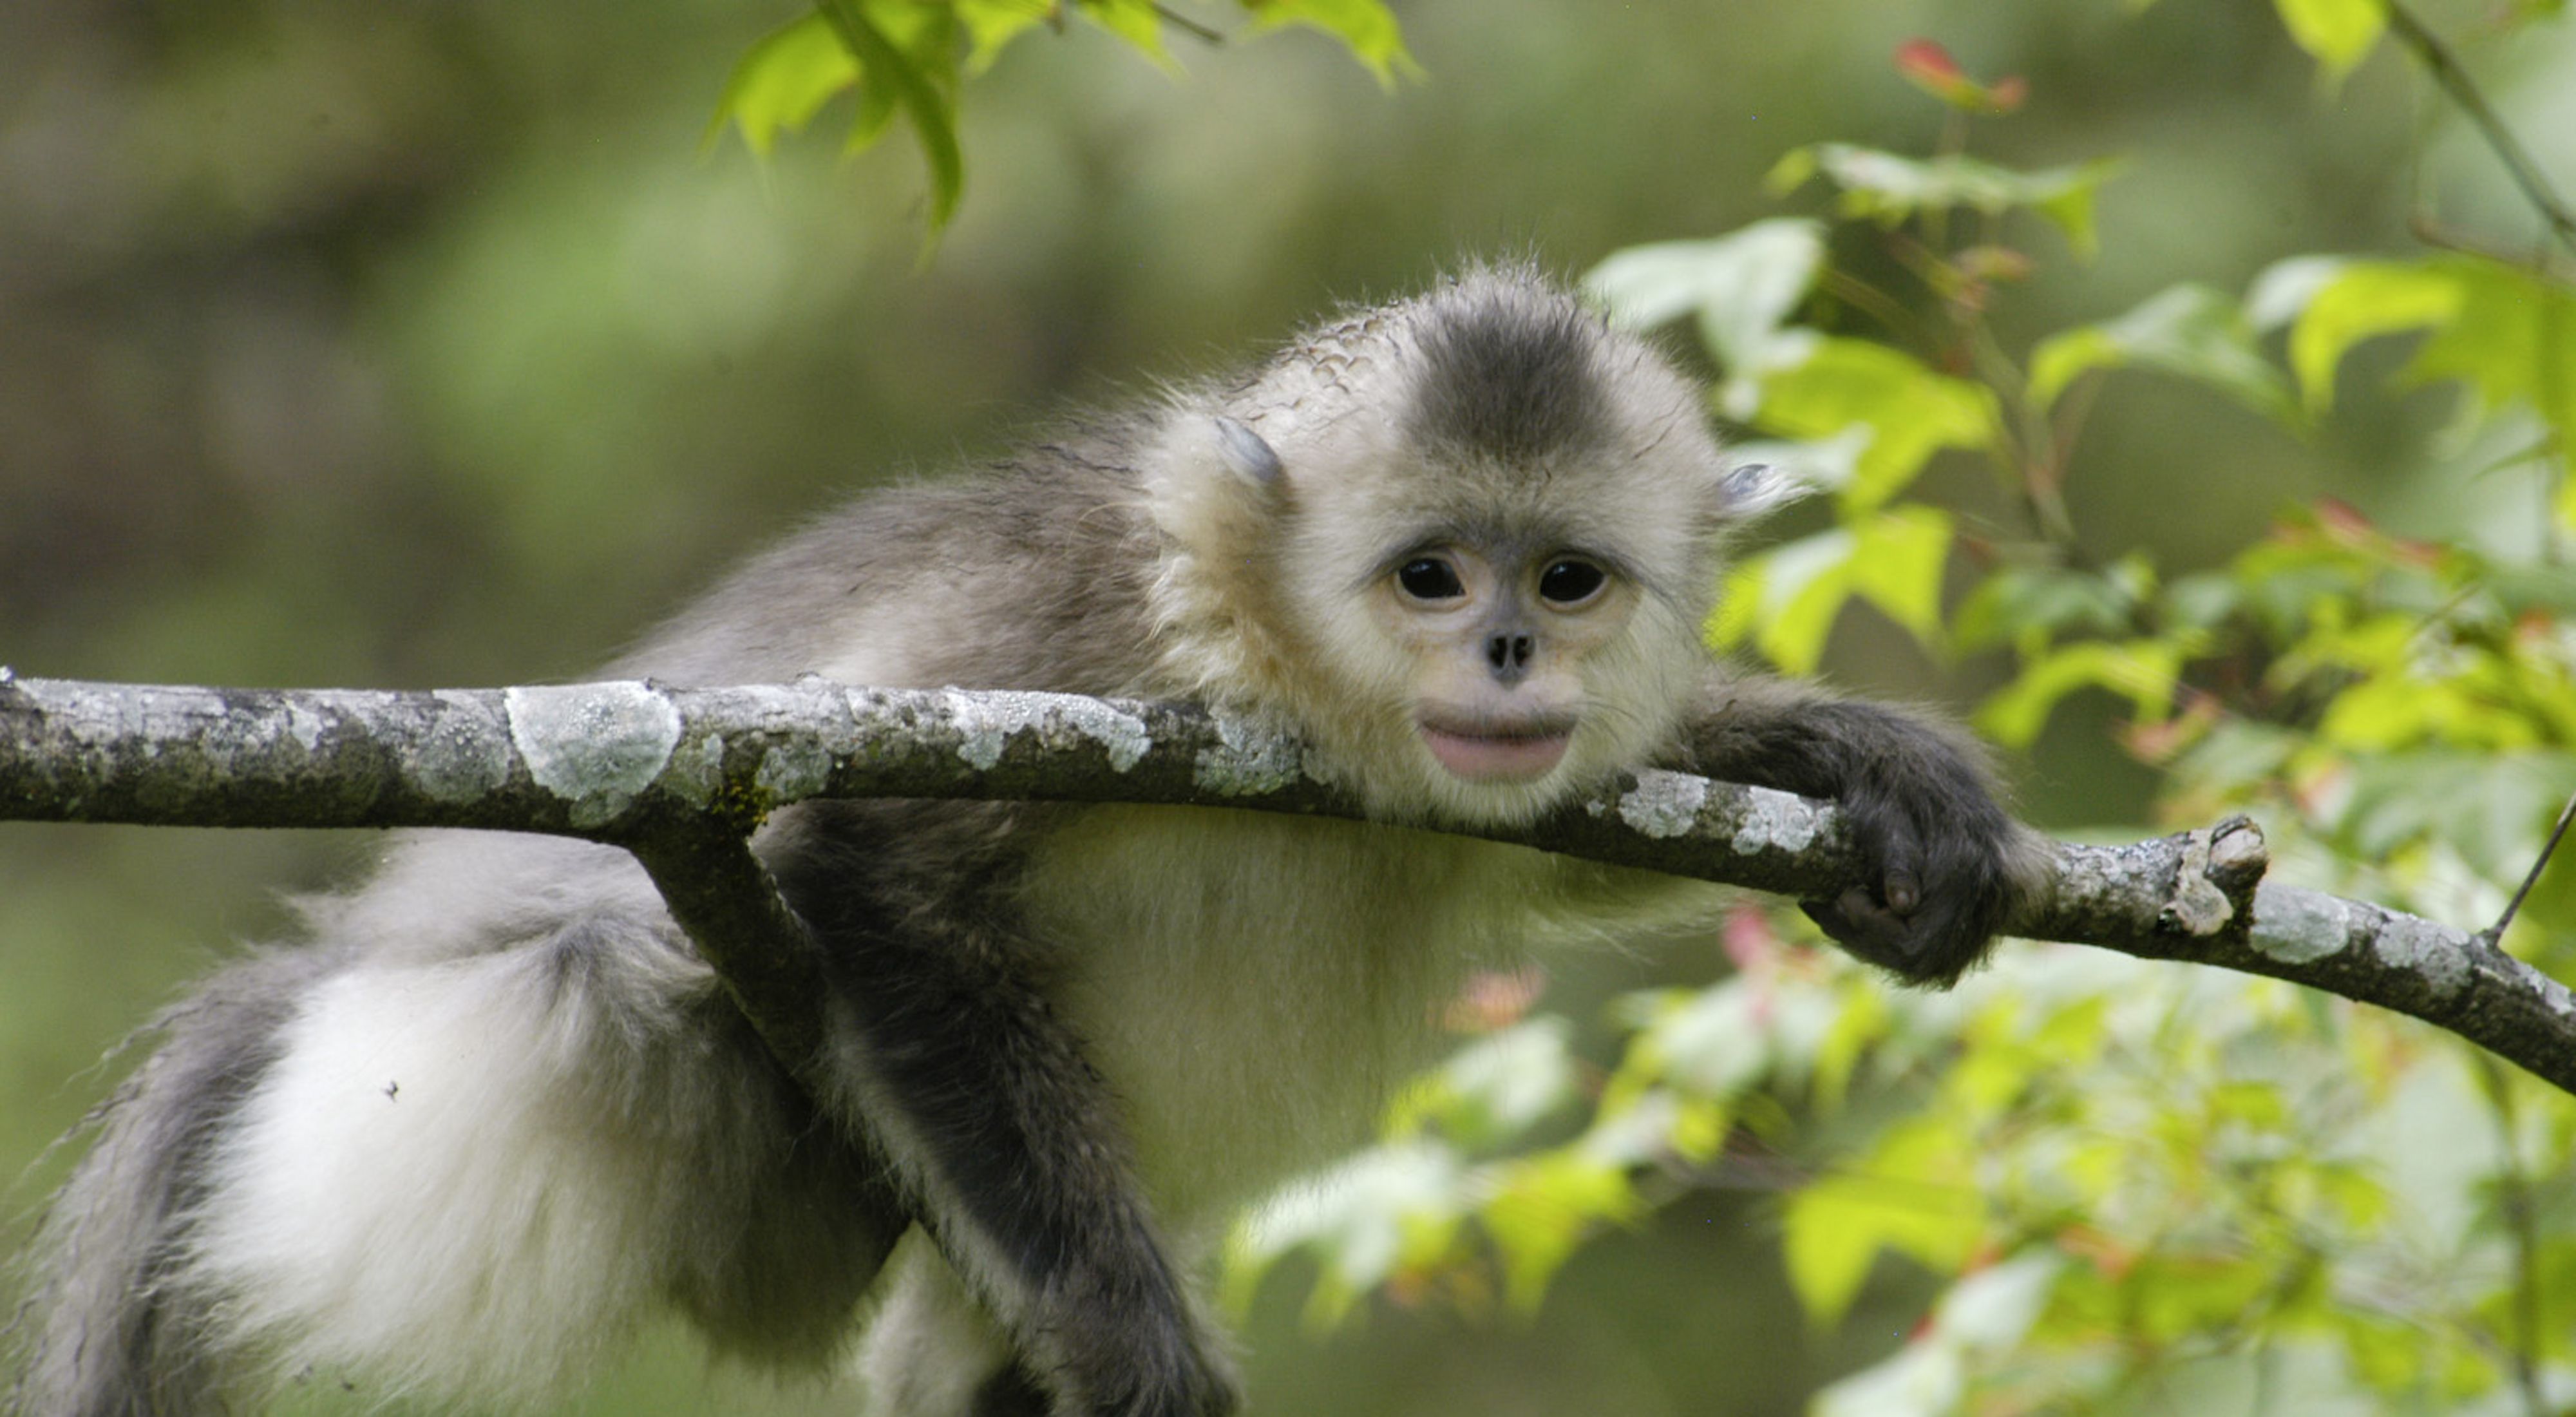 There are fewer than 2,000 Yunnan Golden (Snub-Nosed) Monkeys left in Yunnan's old-growth alpine forests. They are considered one of the most endangered primates on Earth.